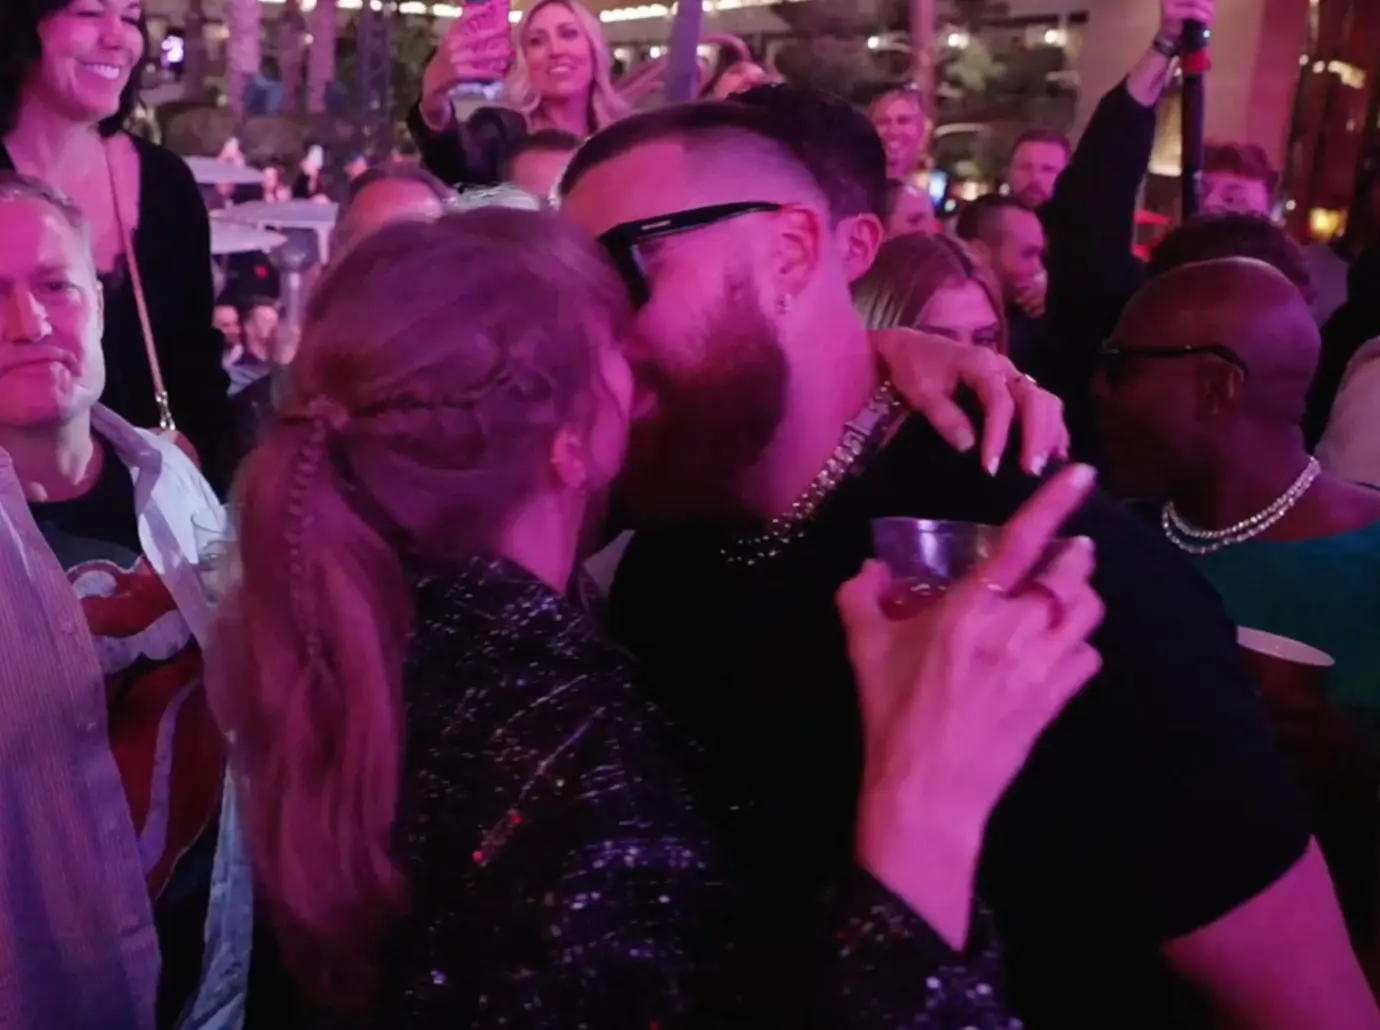 Despite the Presence of Press and Haters, Travis Kelce and Taylor Swift Remain Unfazed in Displaying Affection: They're Clearly in Their Own Bubble, Ignoring External Noise.